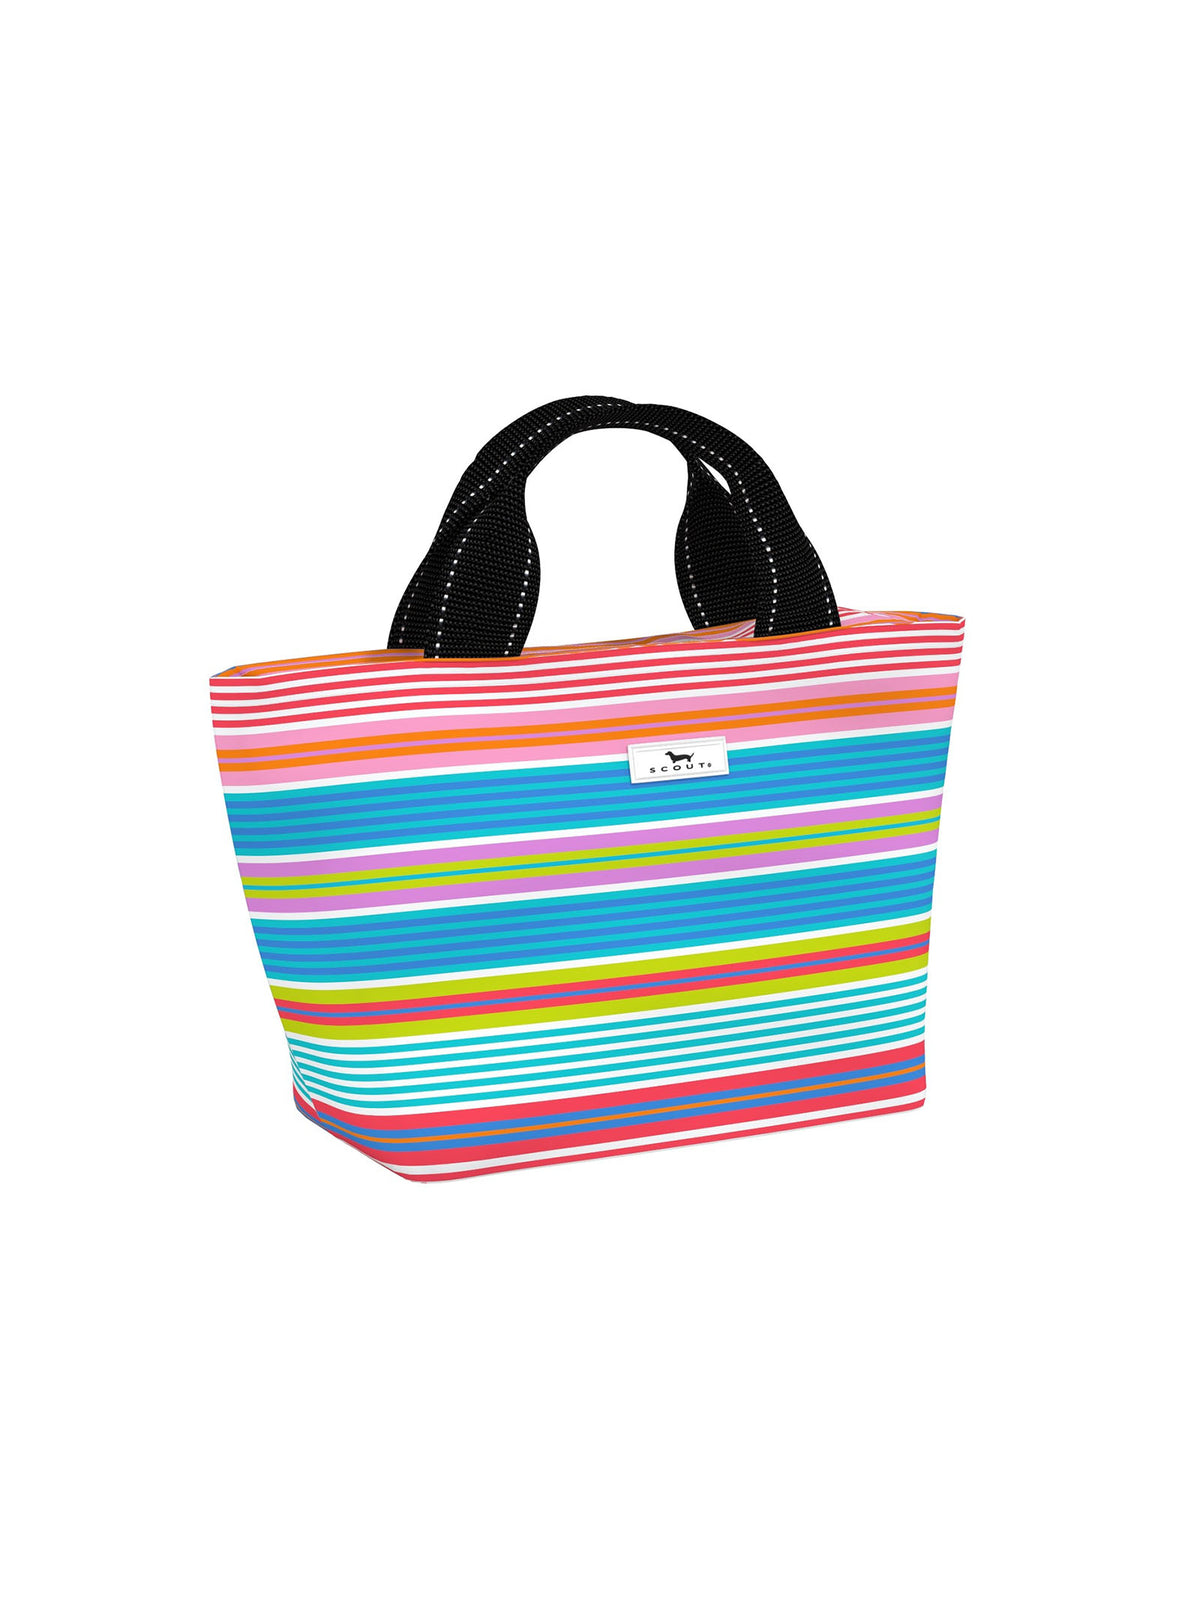 SCOUT nooner lunch box in fruit of tulum print